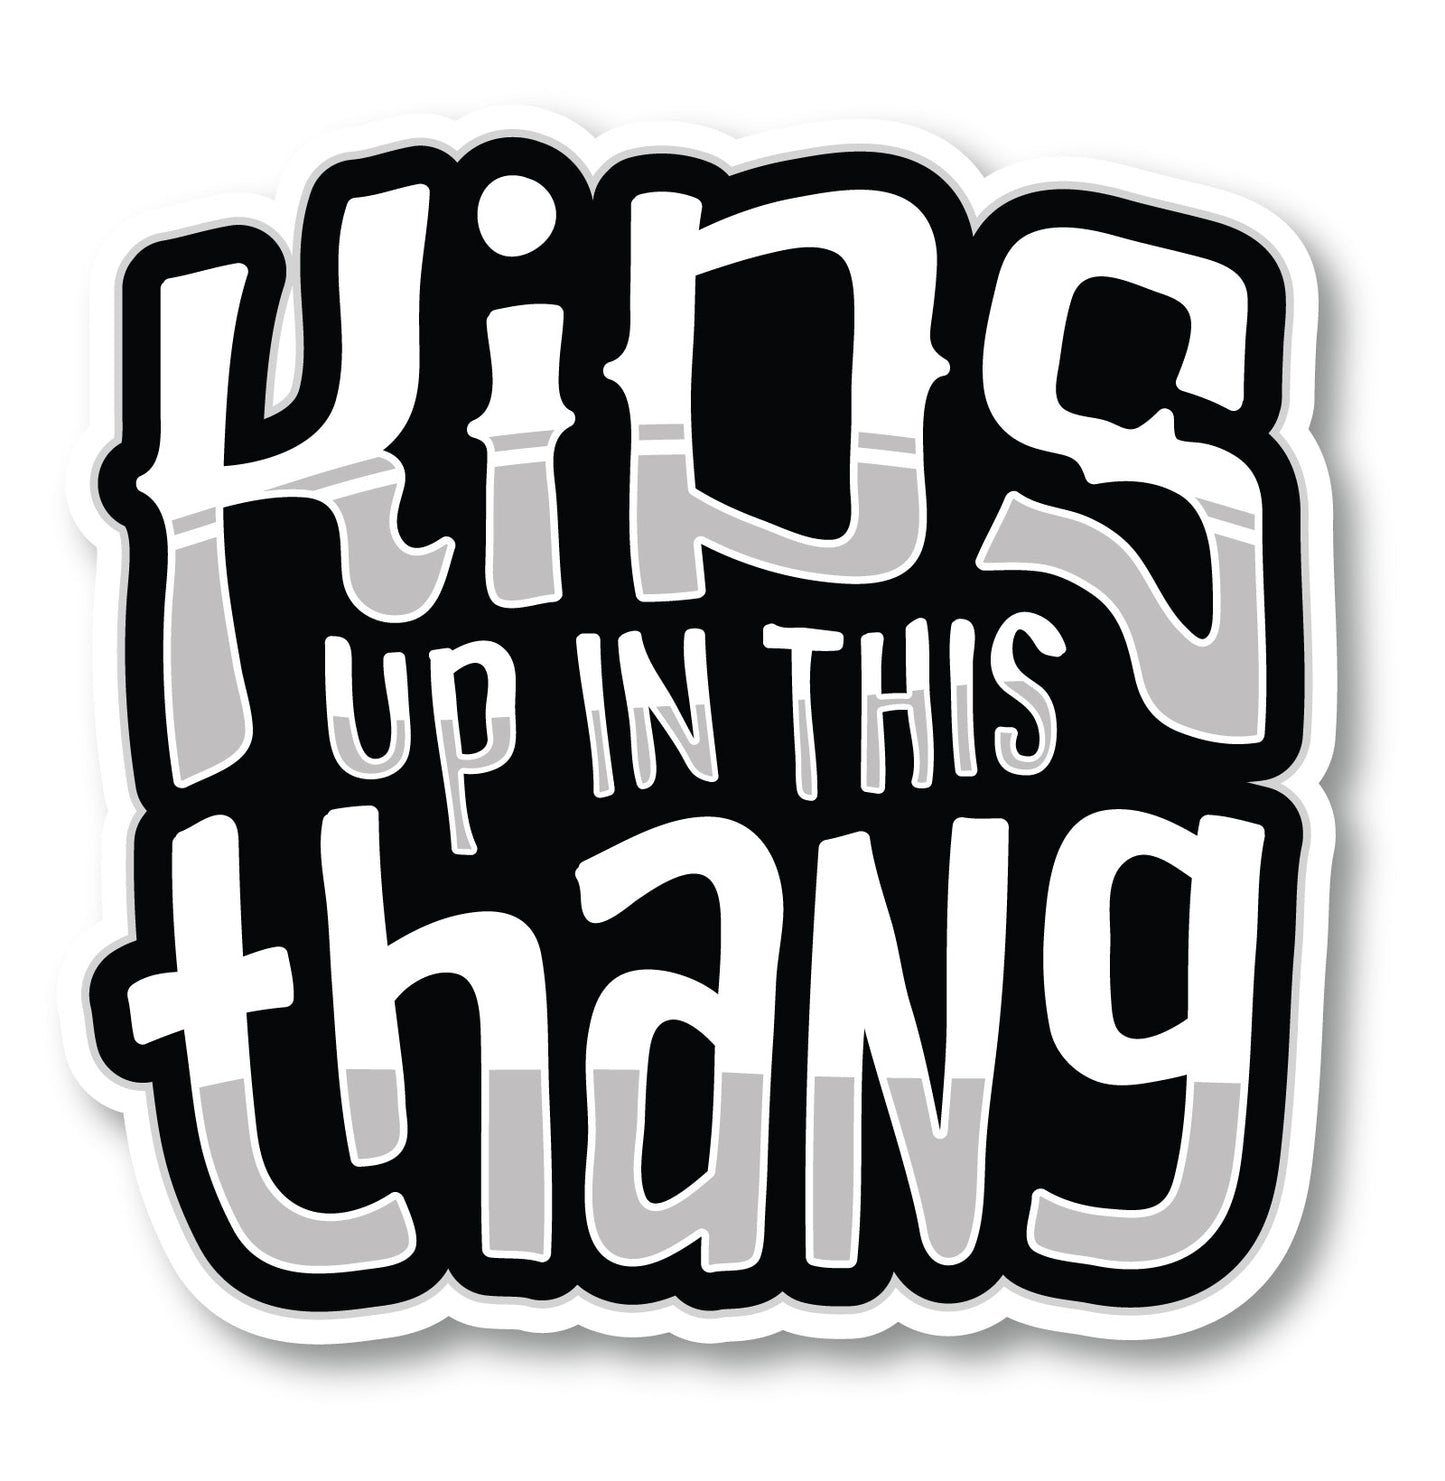 Kids up in this Thang Decal (Black and White) (5"x5")